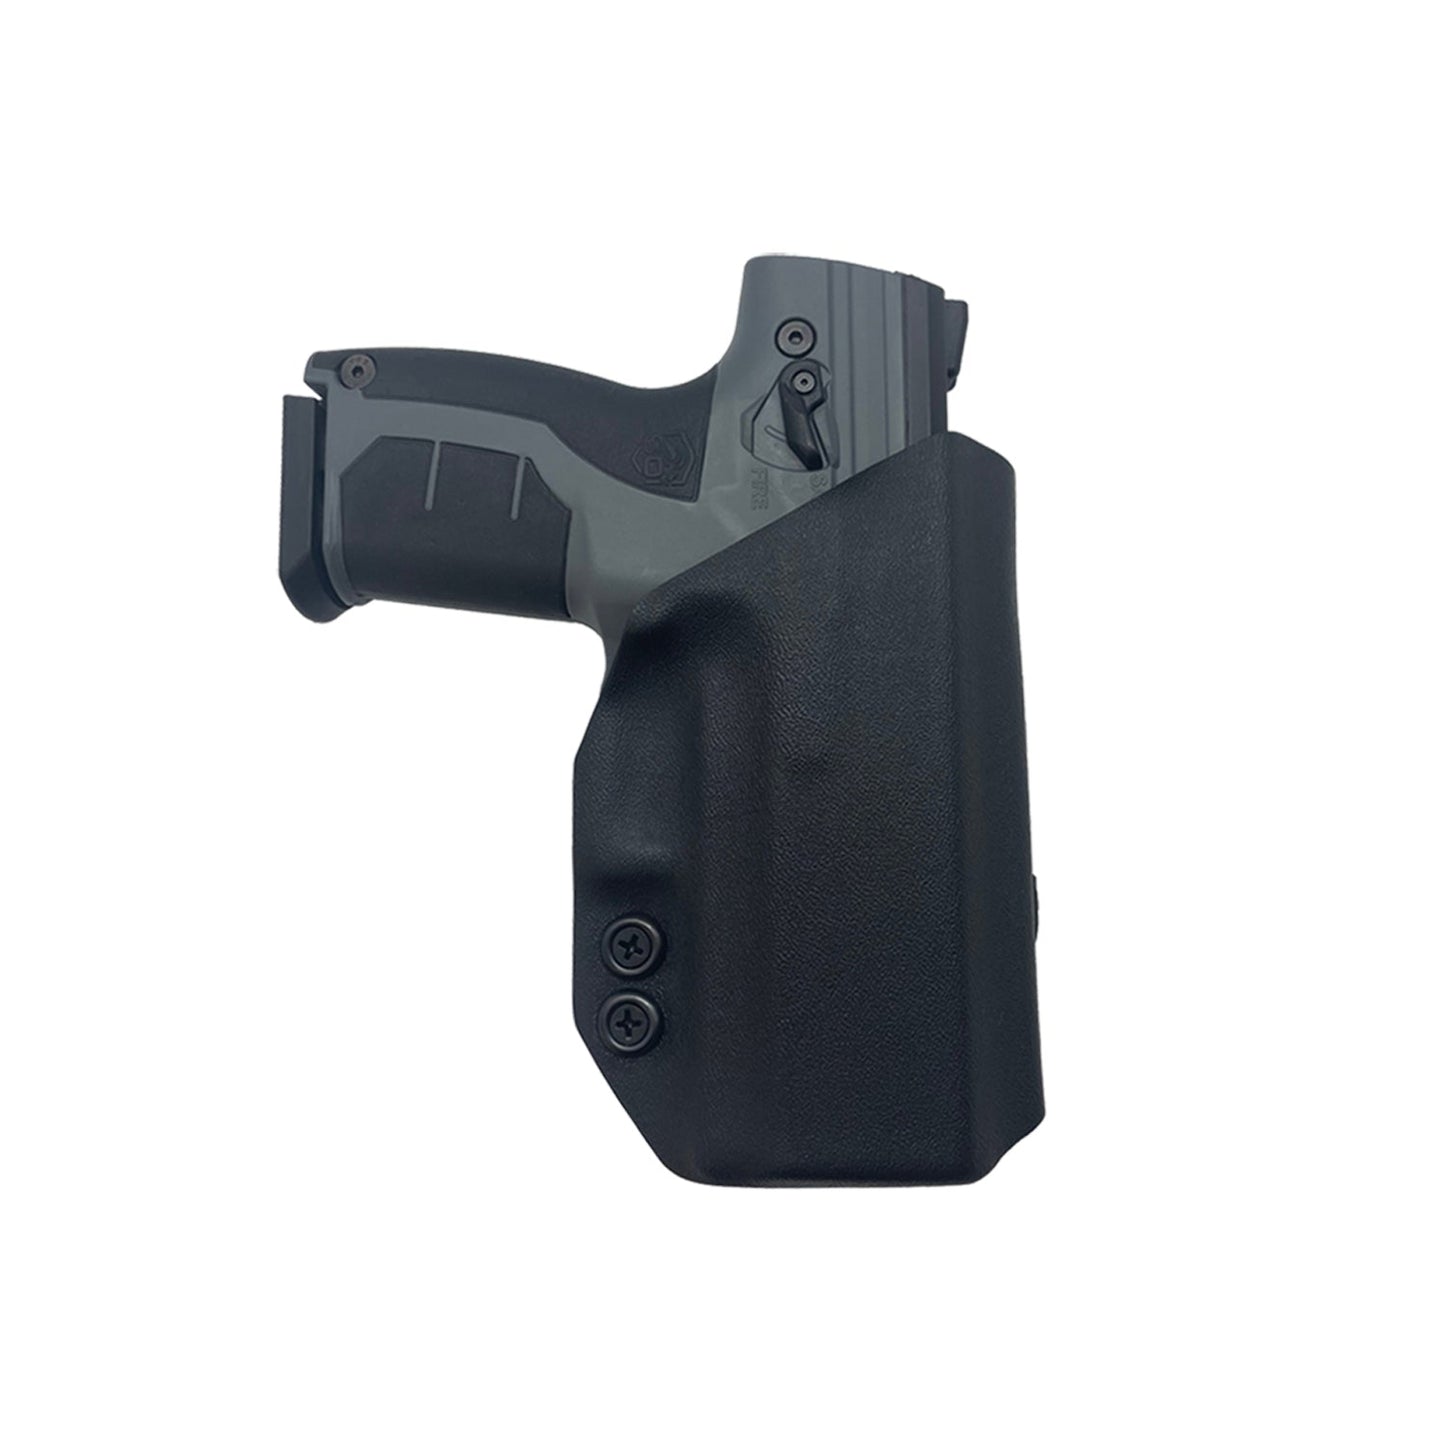 BYRNA HD/ SD With TLR7/TLR7A Light OWB (Outside Waistband Holster)